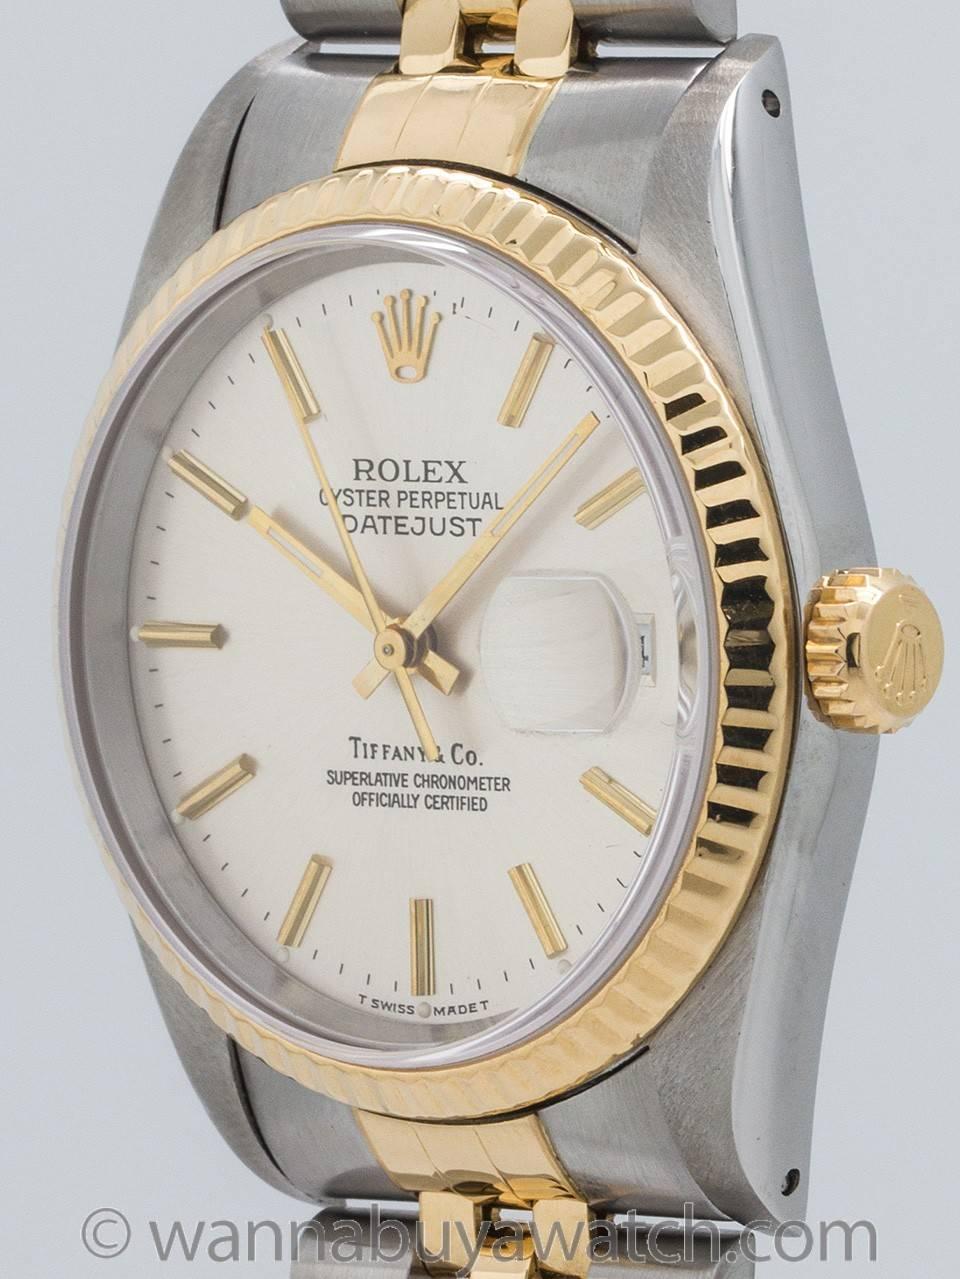 Man’s Rolex Datejust ref 16233 stainless steel and 18K gold serial # E8 circa 1990 retailed by Tiffany & Co. Featuring 36mm diameter case with 18K YG fluted bezel, acrylic crystal, and very pleasing original silvered satin dial signed Tiffany & Co.